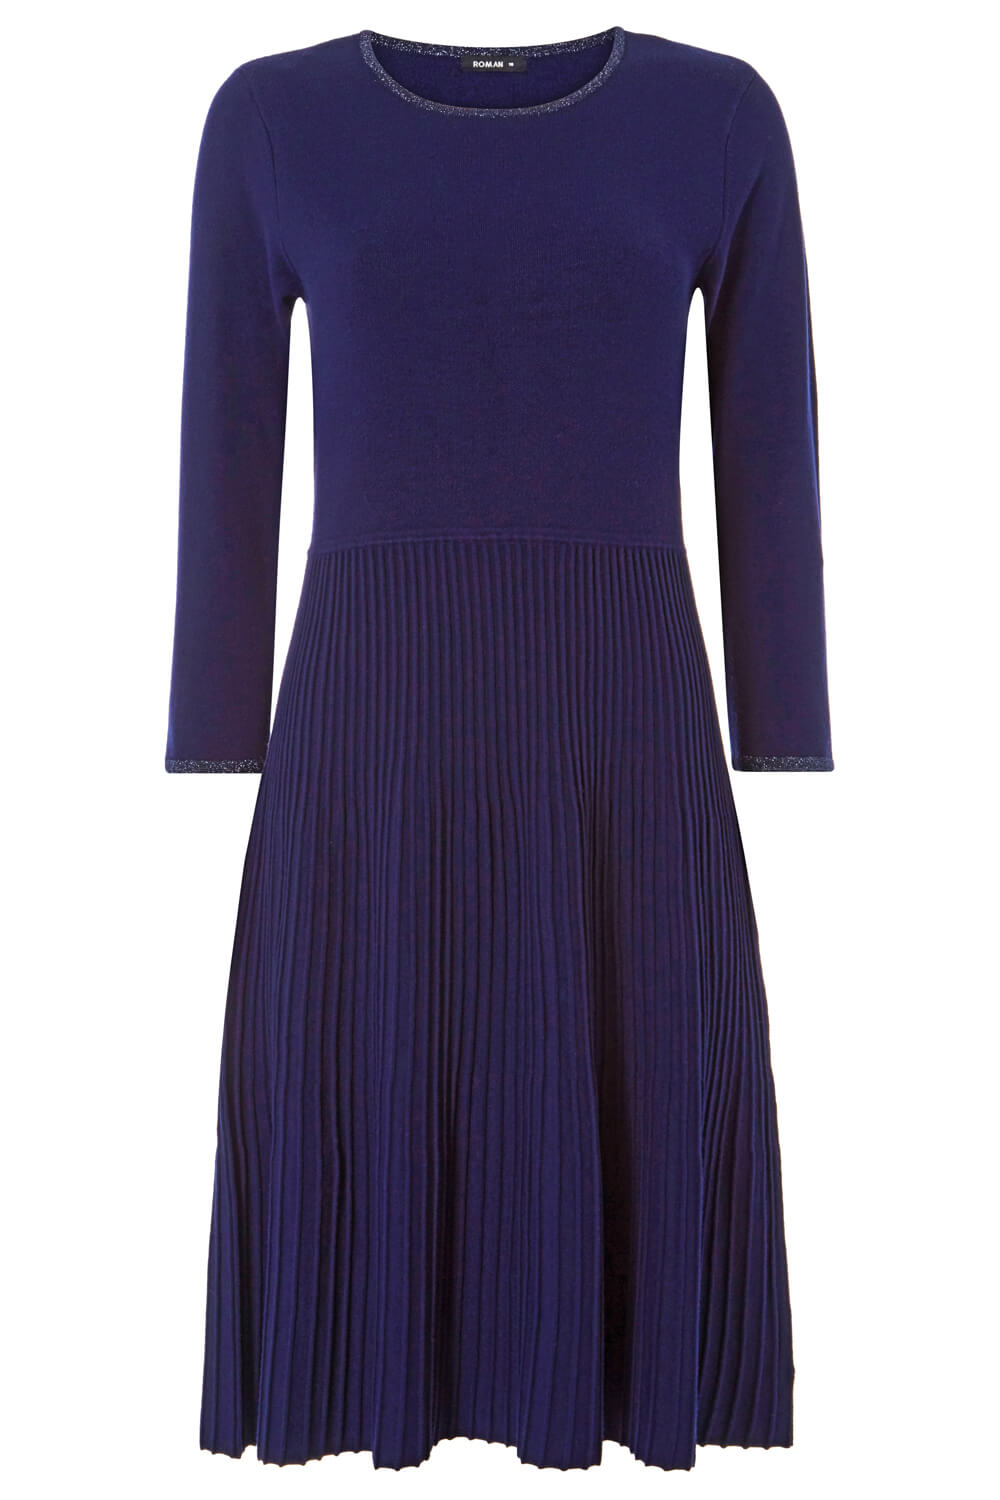 Fit and Flare Knitted Dress in Navy - Roman Originals UK